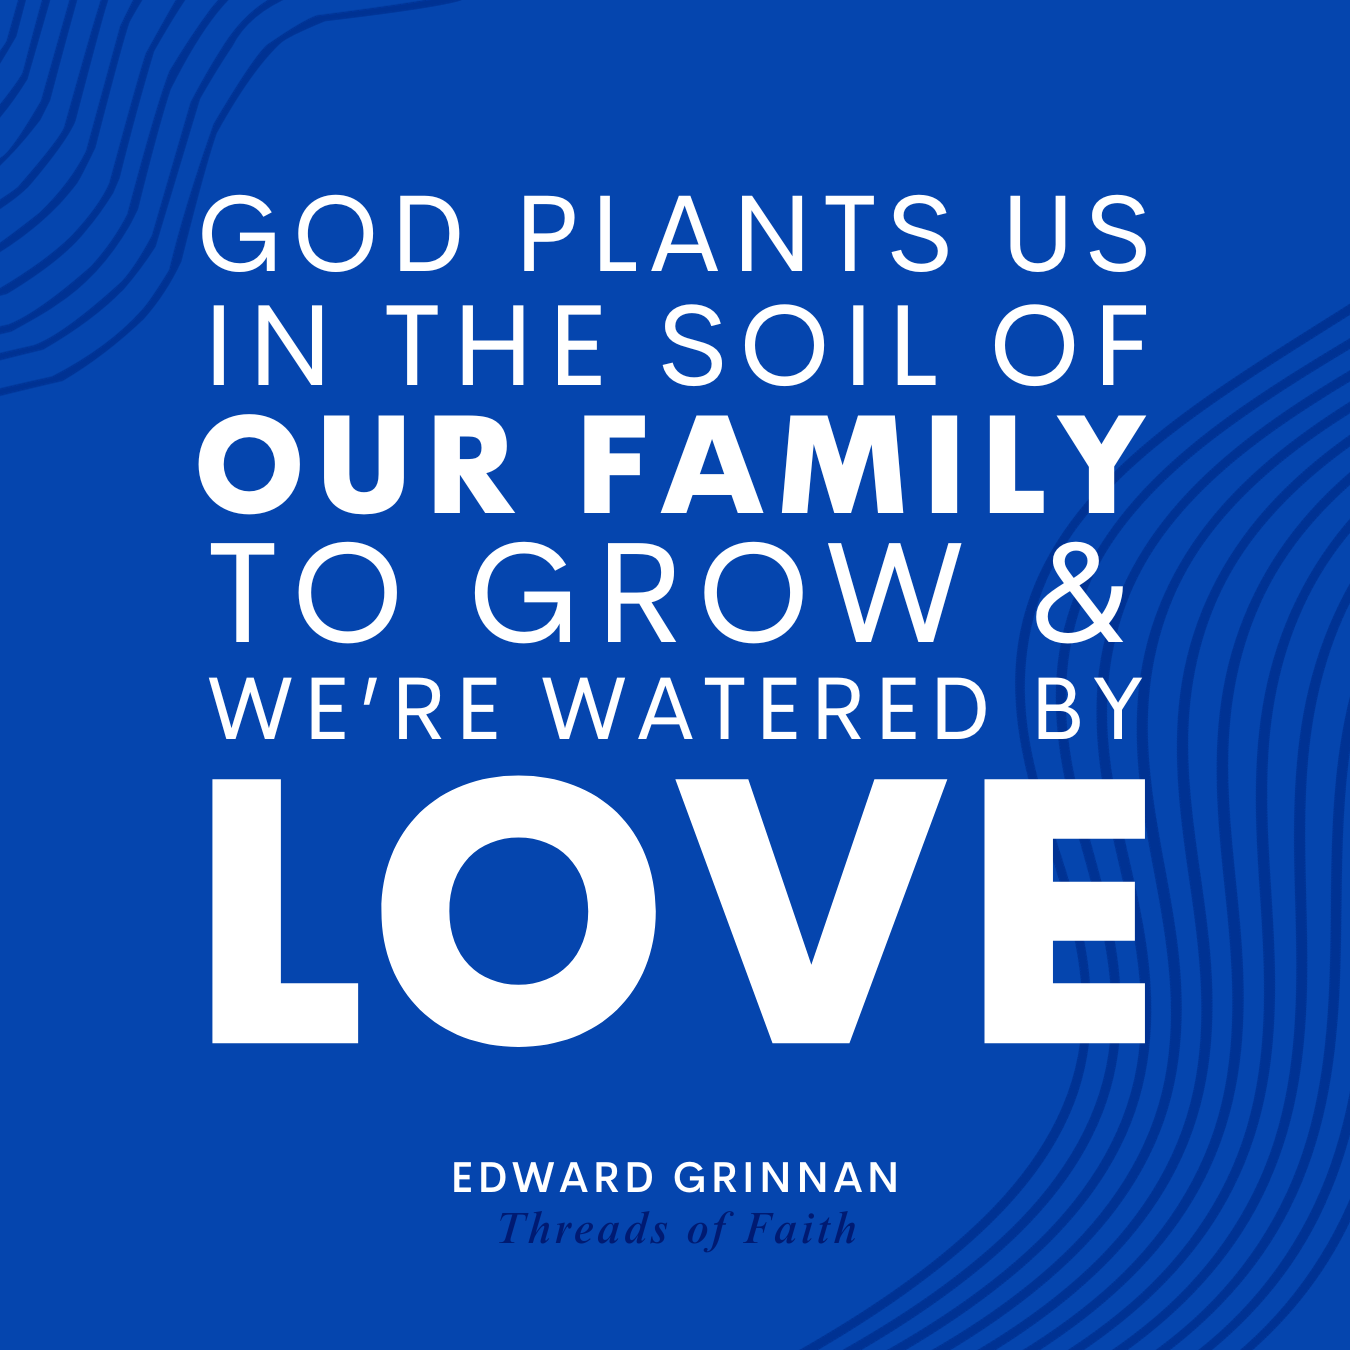 God plants us in the soul of our family